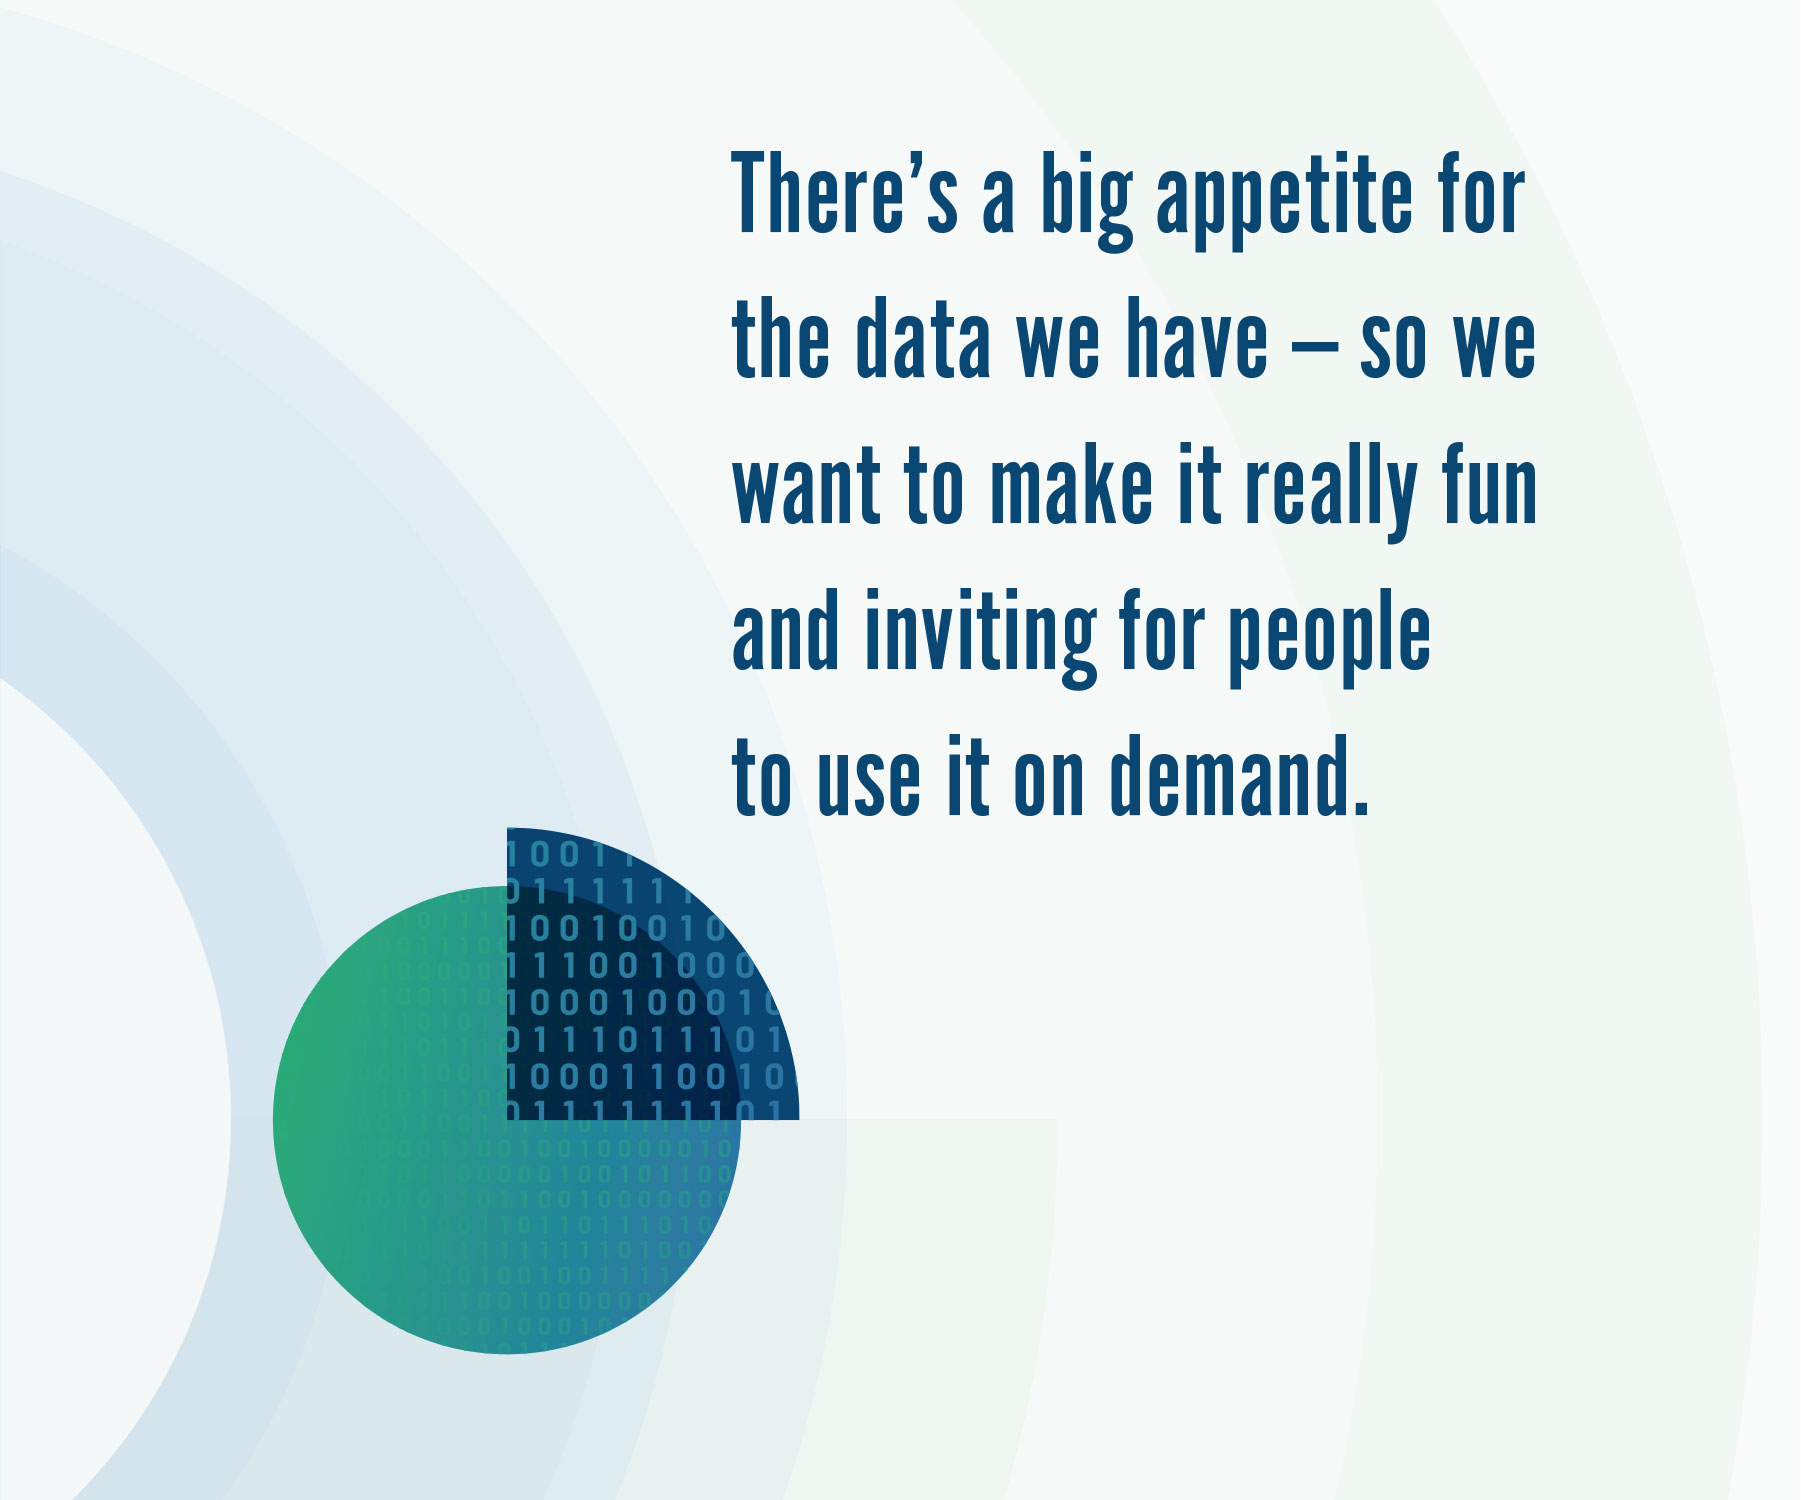 There’s a big appetite for the data we have — so we want to make it really fun and inviting for people to use it on demand.